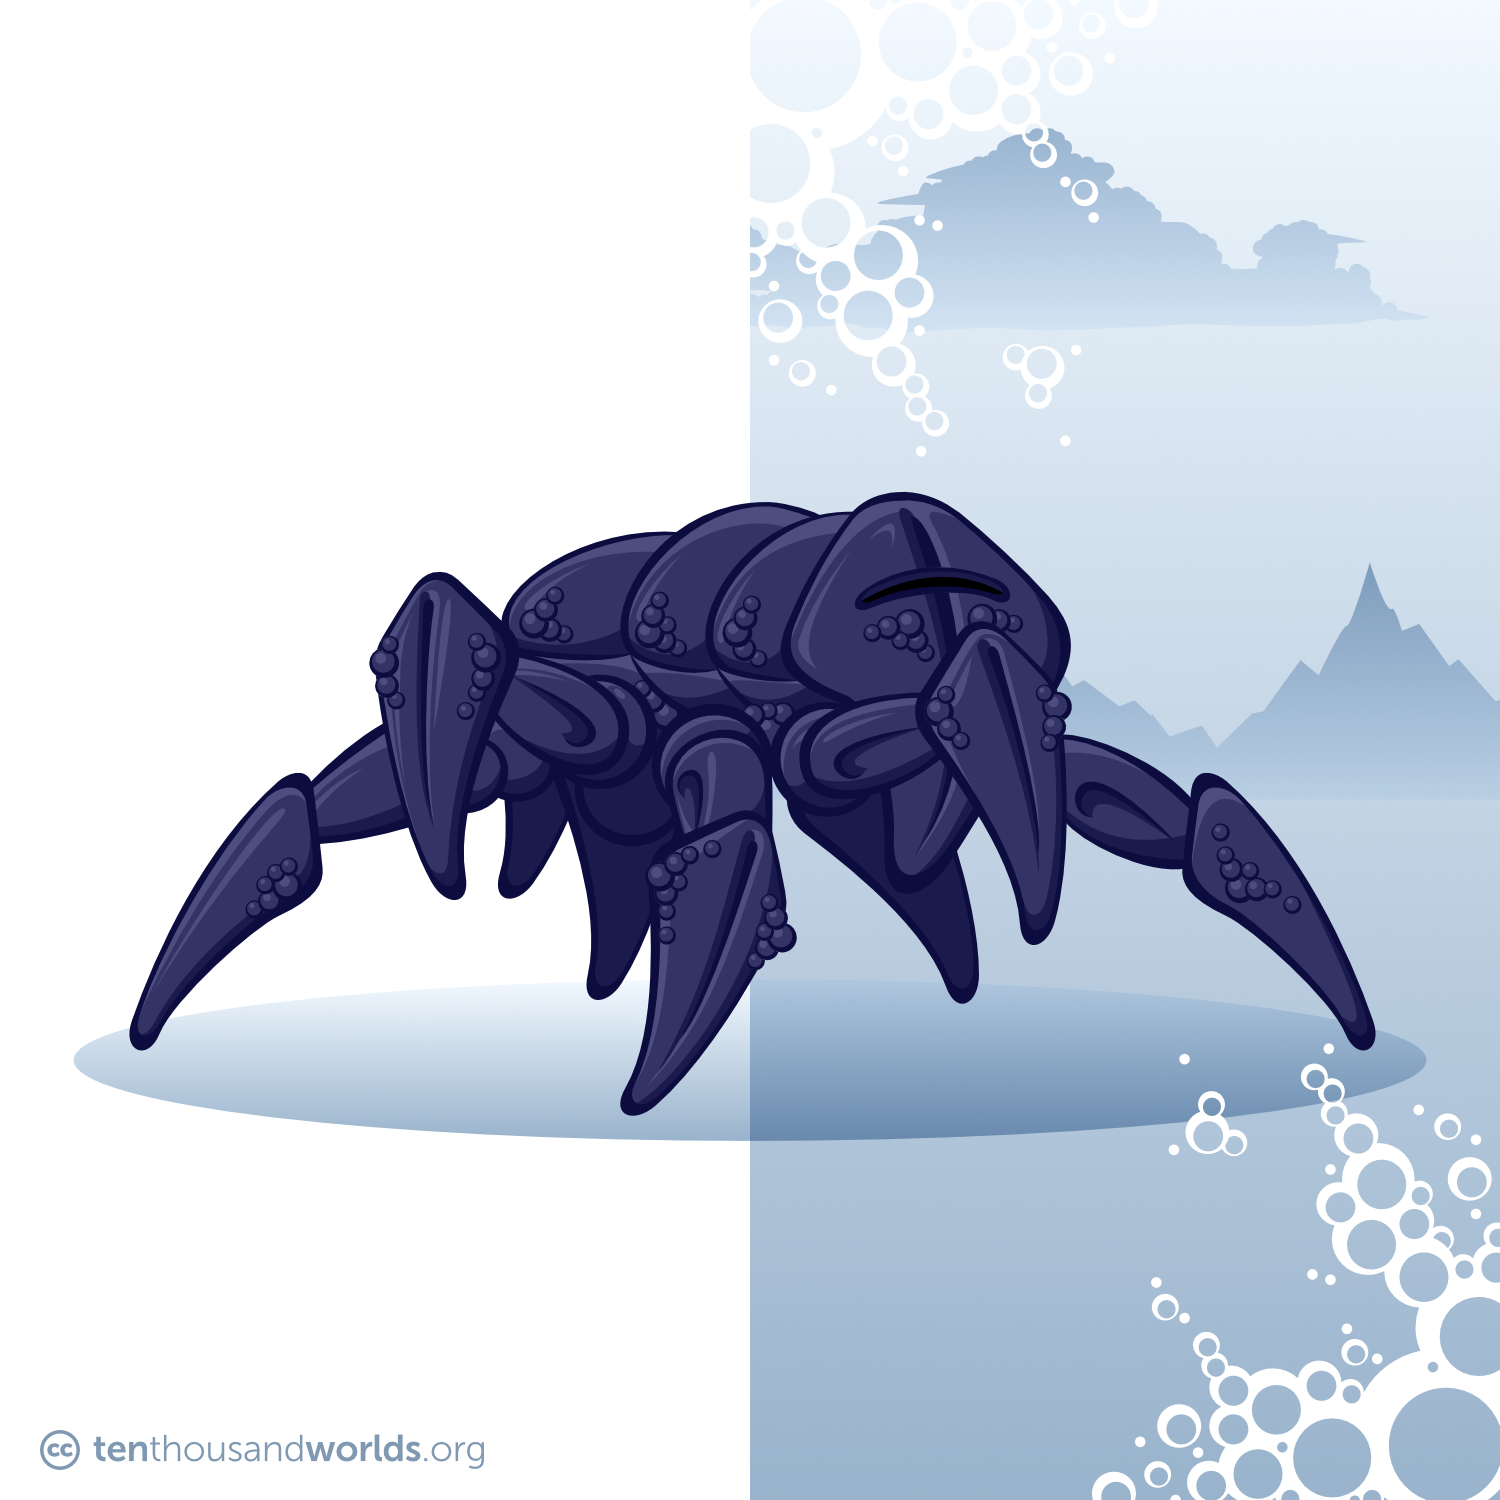 An eight-legged machine resembling a cross between a spider and a crab, covered in a blue black metal with a pebble-like texture, and having a face like a tall shield with a viewing slit.